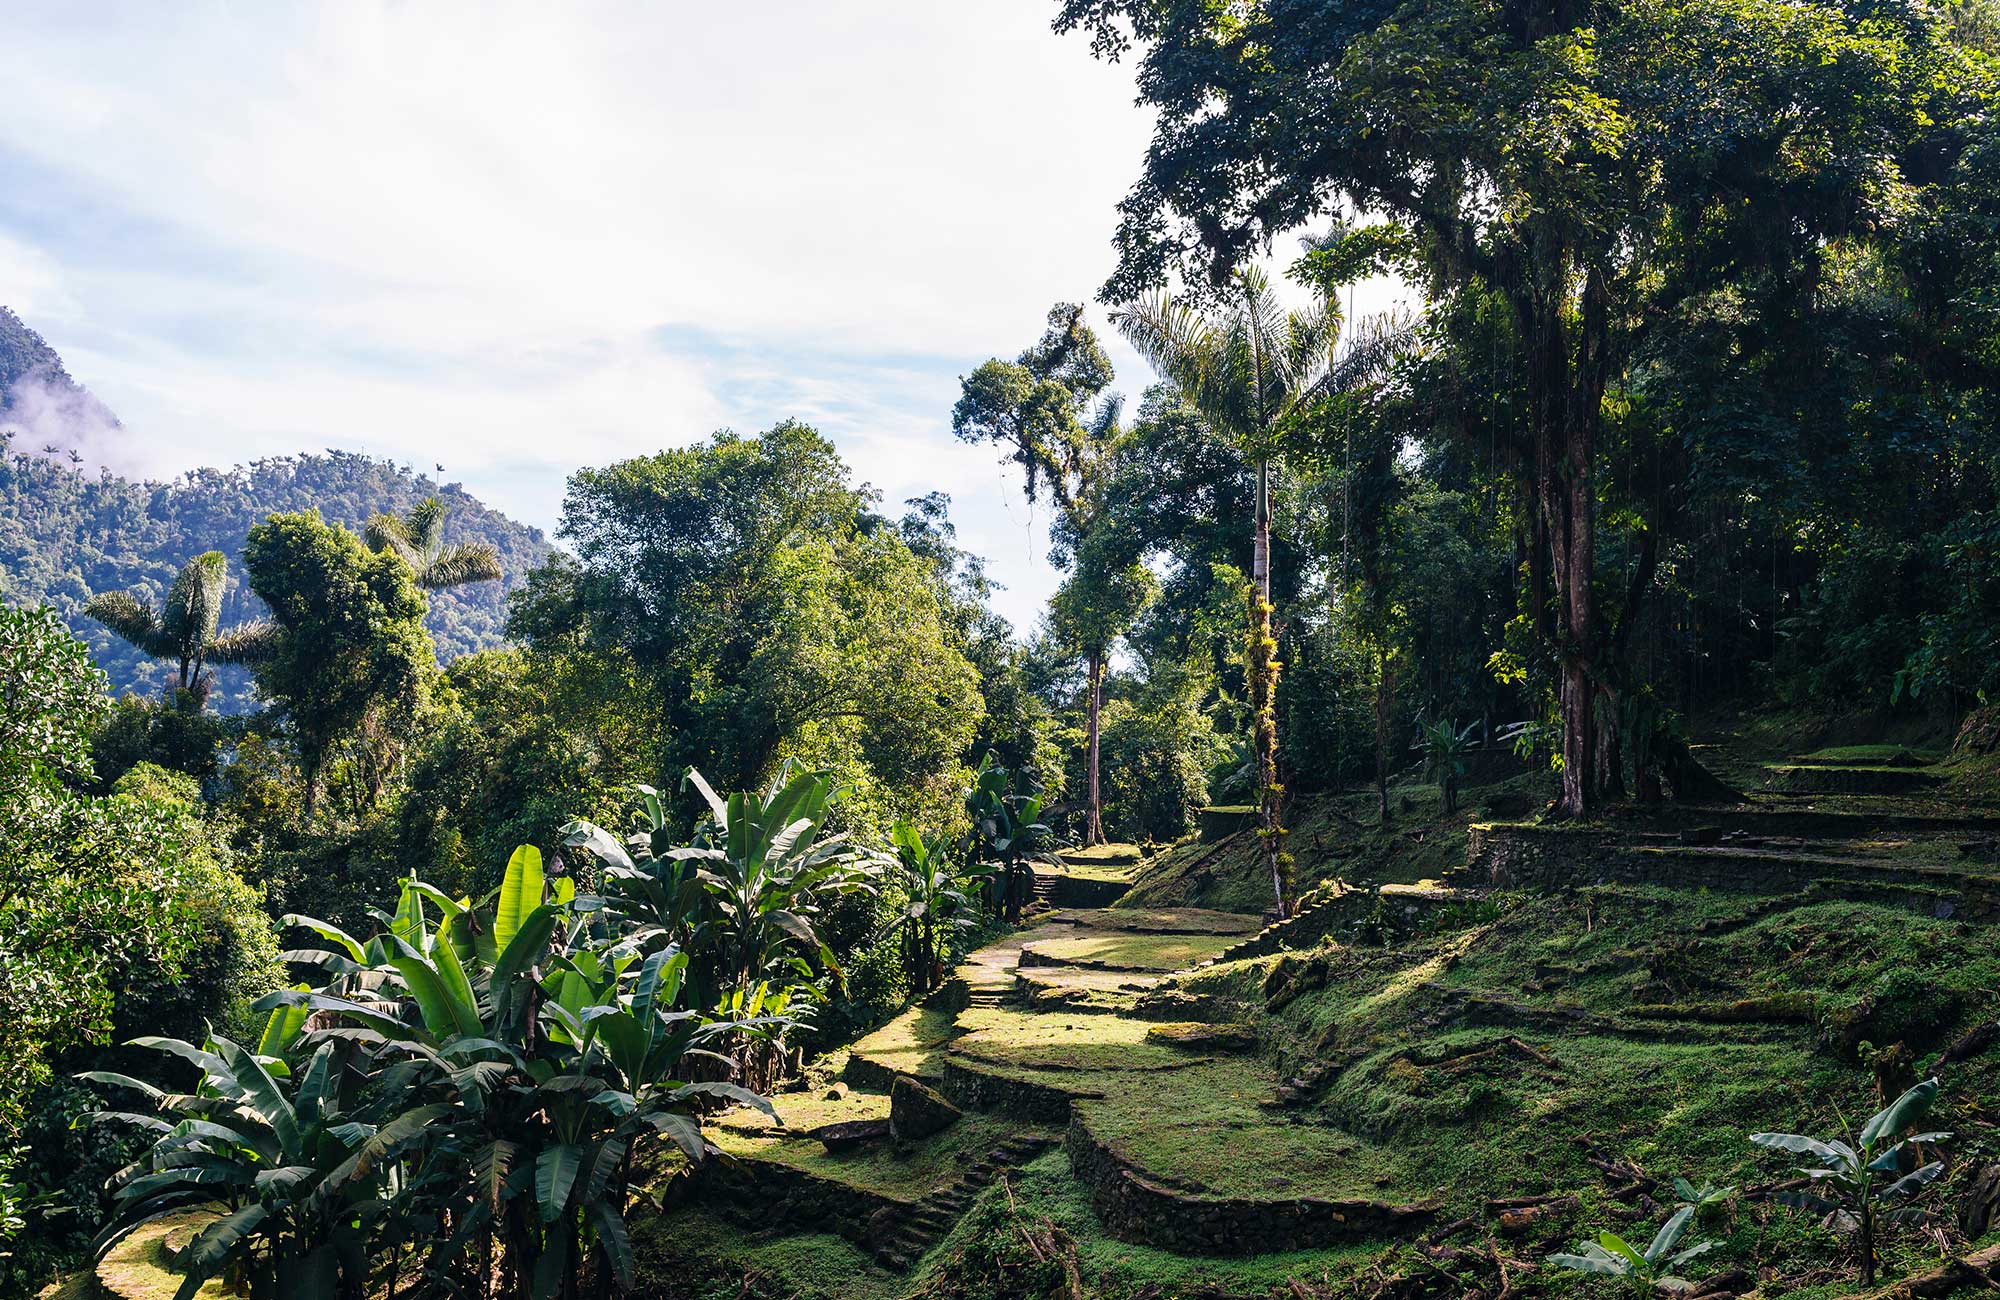 Green jungle in Colombia on the Lost City trek